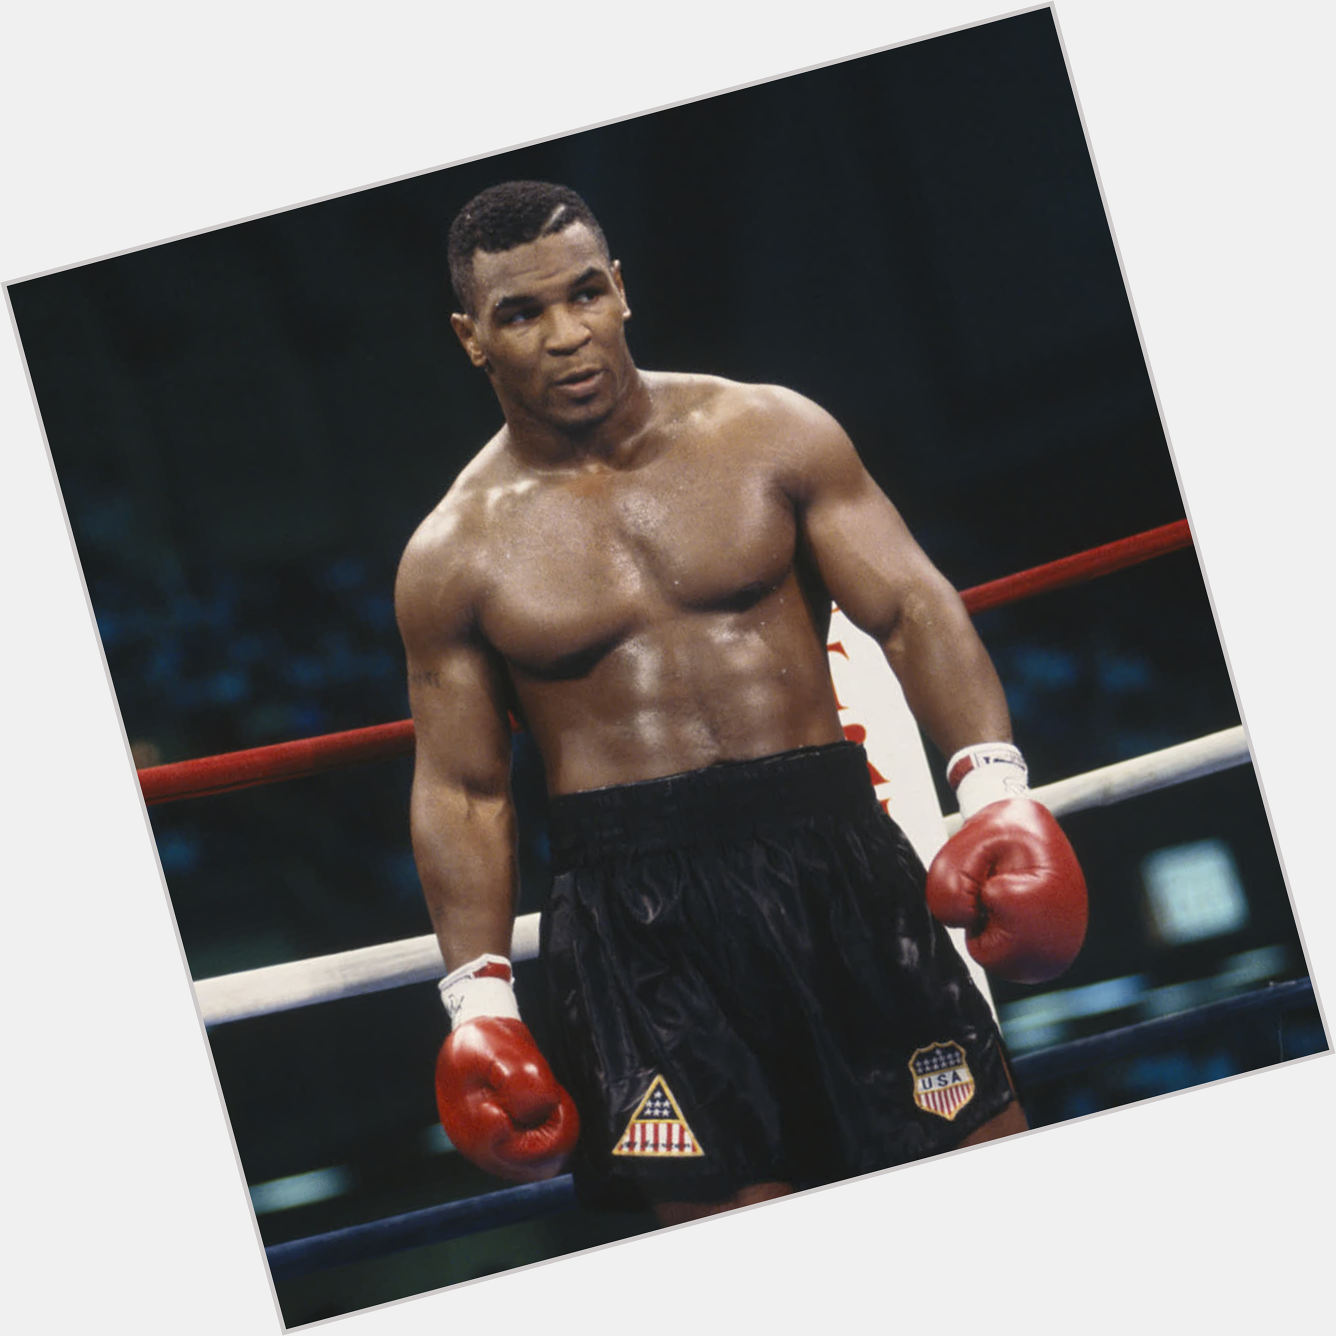 Happy 54th birthday to the man who changed boxing forever - Mike Tyson!  